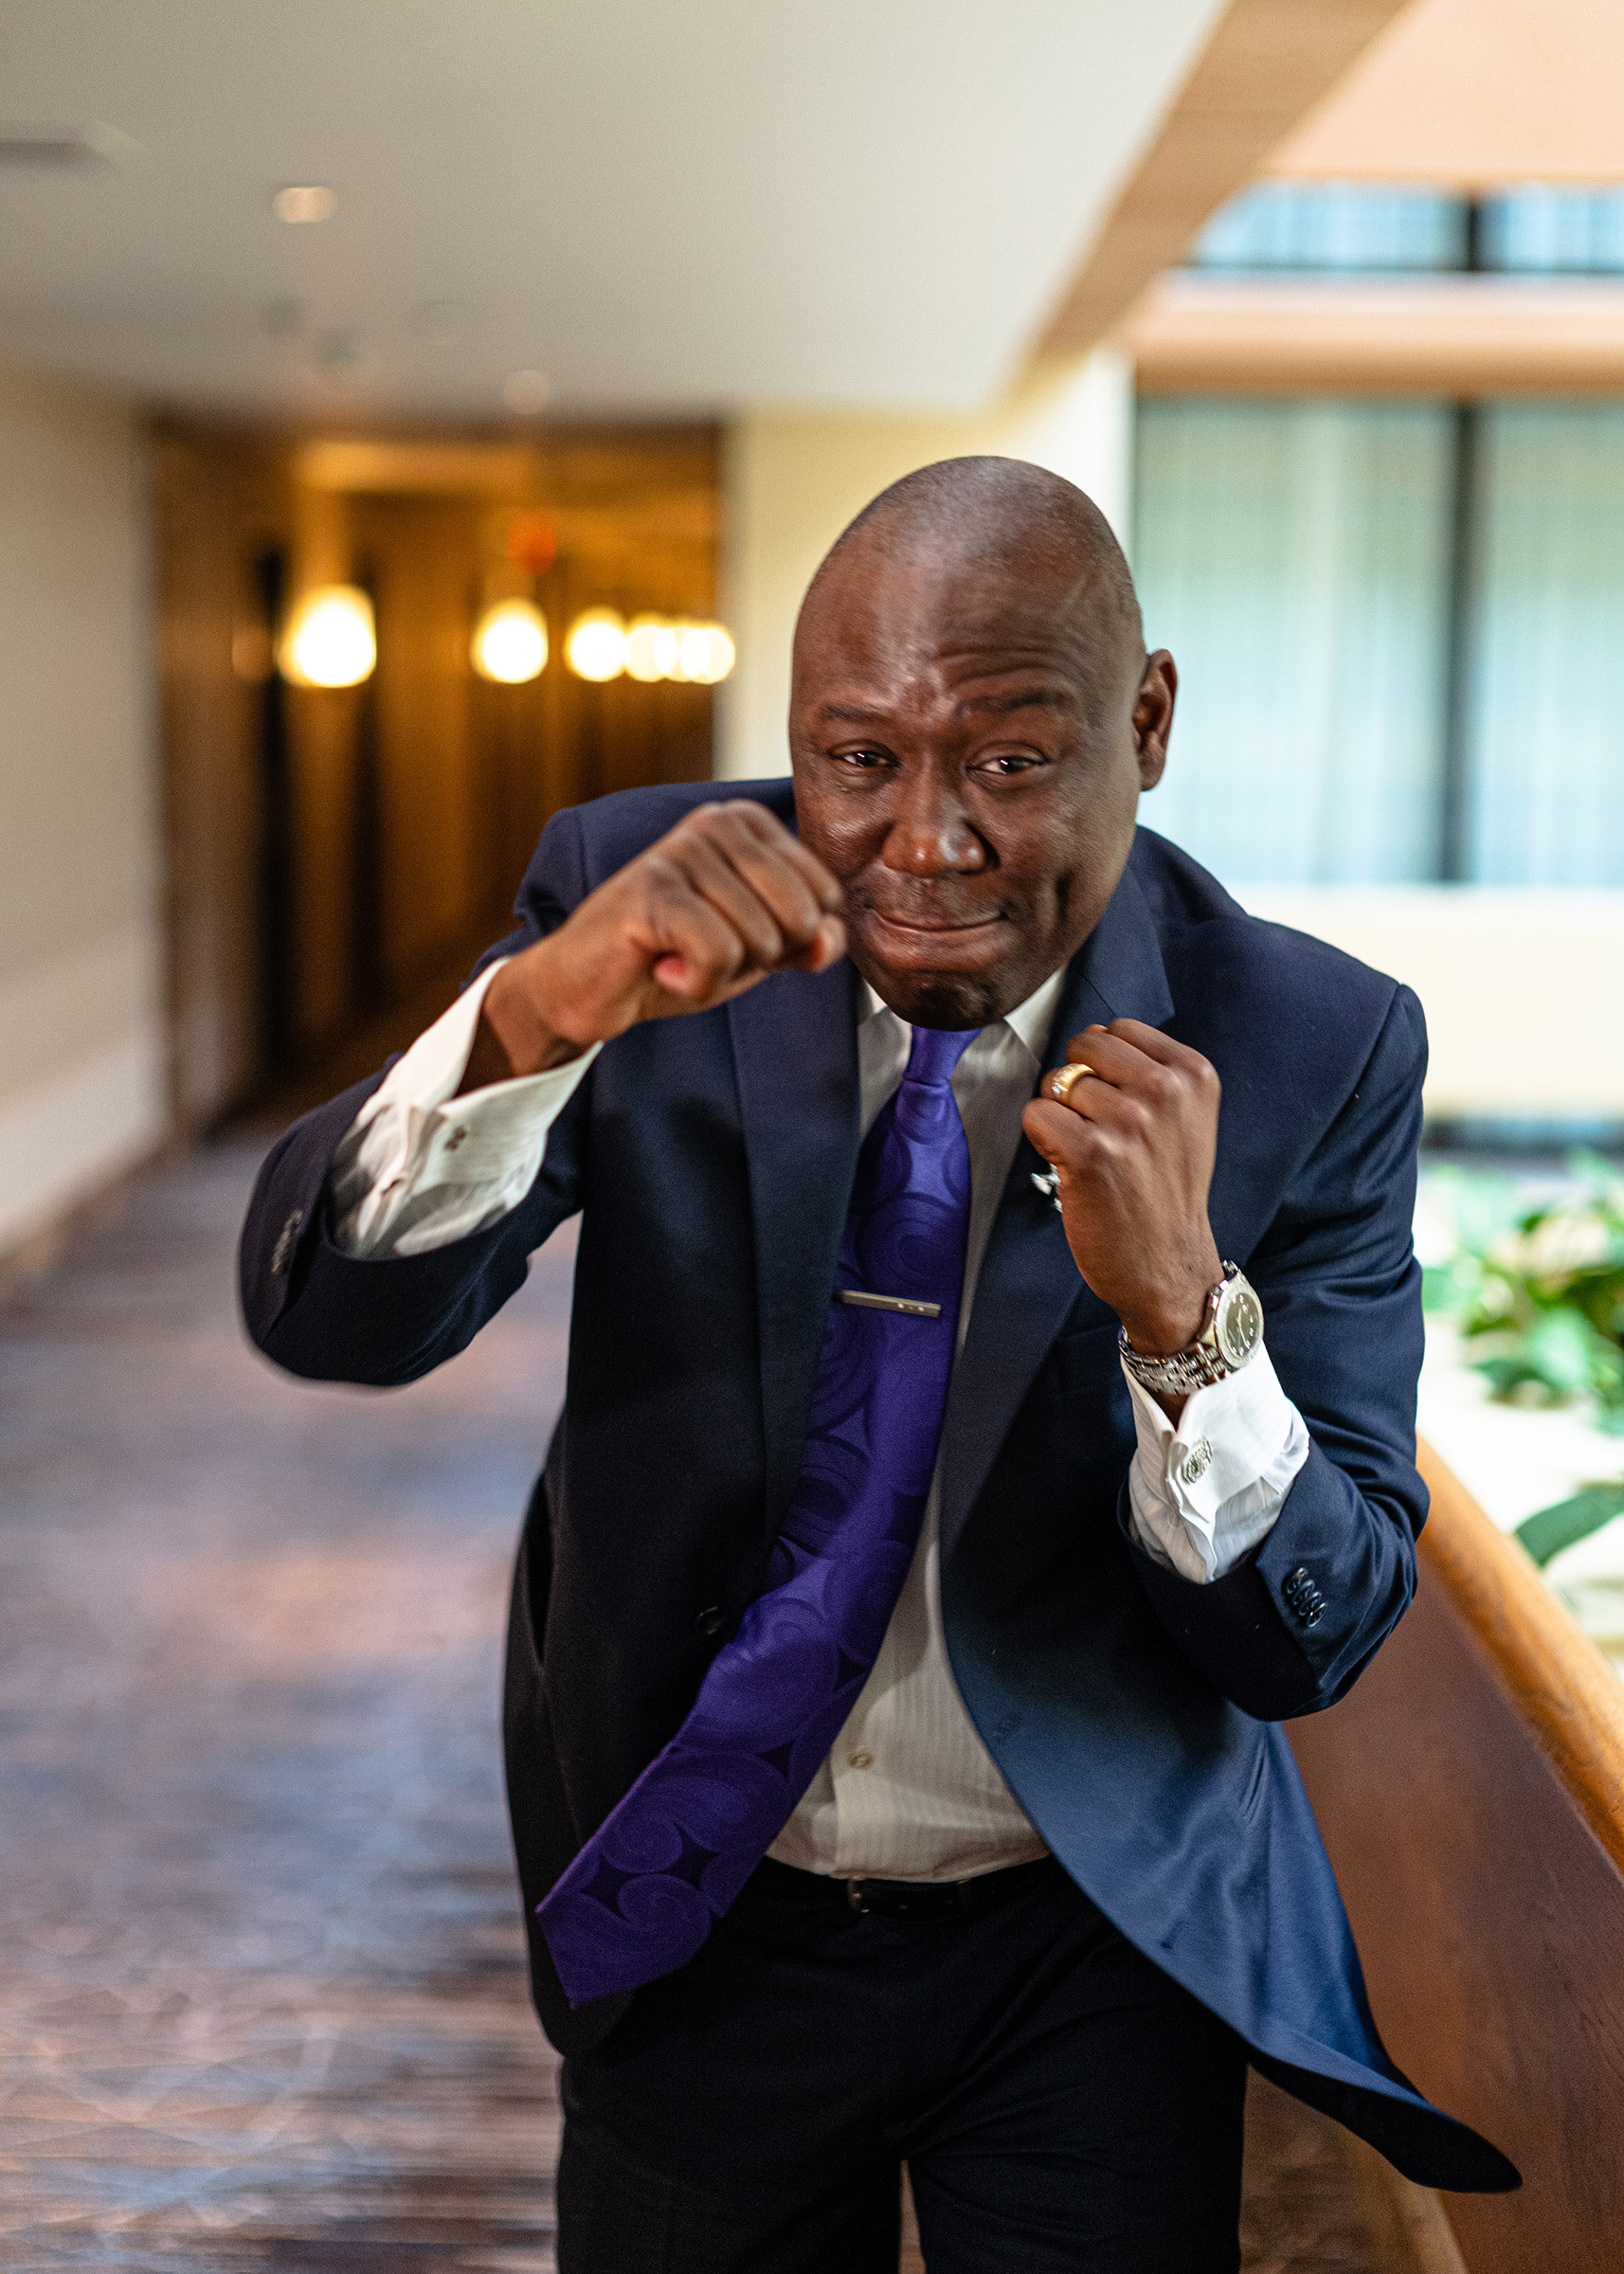 Attorney Ben Crump poses for a photograph on June 7, 2020, at a Houston hotel. (Ruddy Roye for TIME)